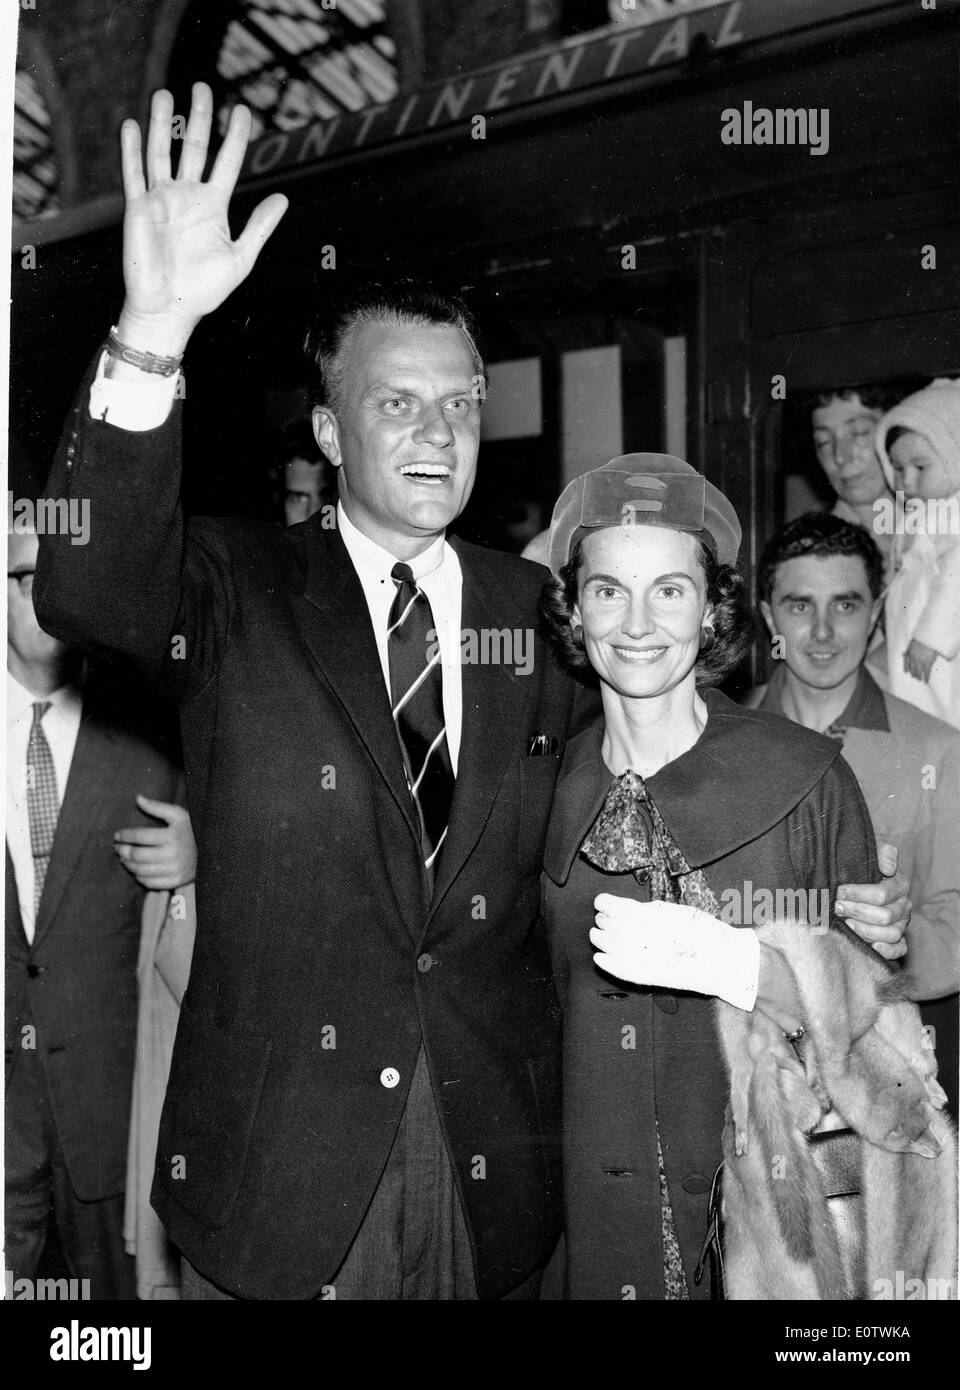 Reverend Billy Graham and wife arrive at Victoria Station Stock Photo